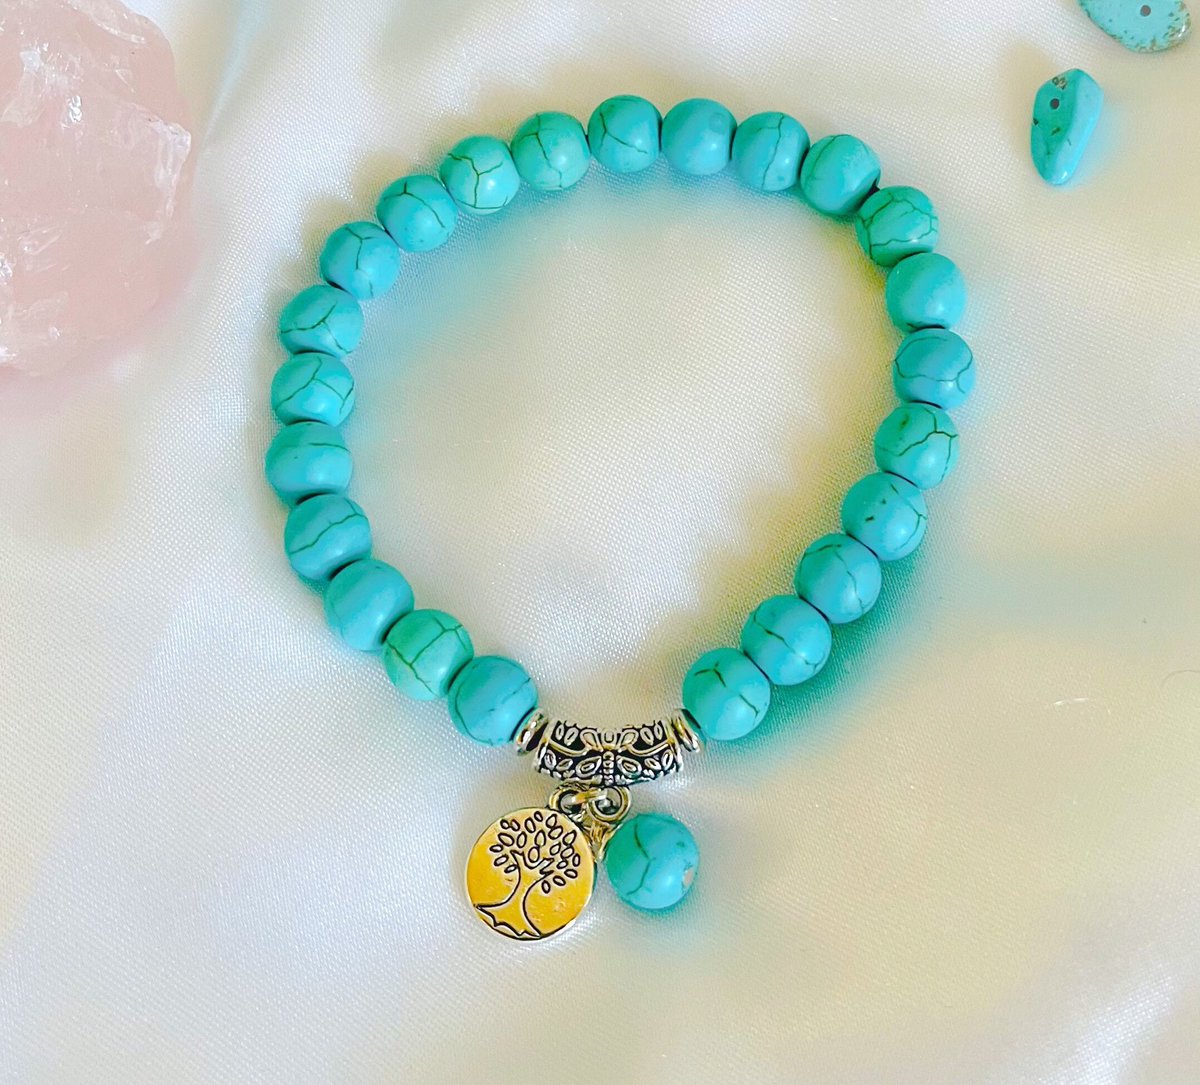 Excited to share this item from my #etsy shop: Turquoise Beaded Bracelet, Tree of Life Turquoise Charm Summer Bracelet. #healingbracelet #reikibracelet #yogabracelet #meditationbracelet #beadedbracelet #handmadebracelet #stretchbracelet #8mmbeadbracelet etsy.me/3ZZVmEI